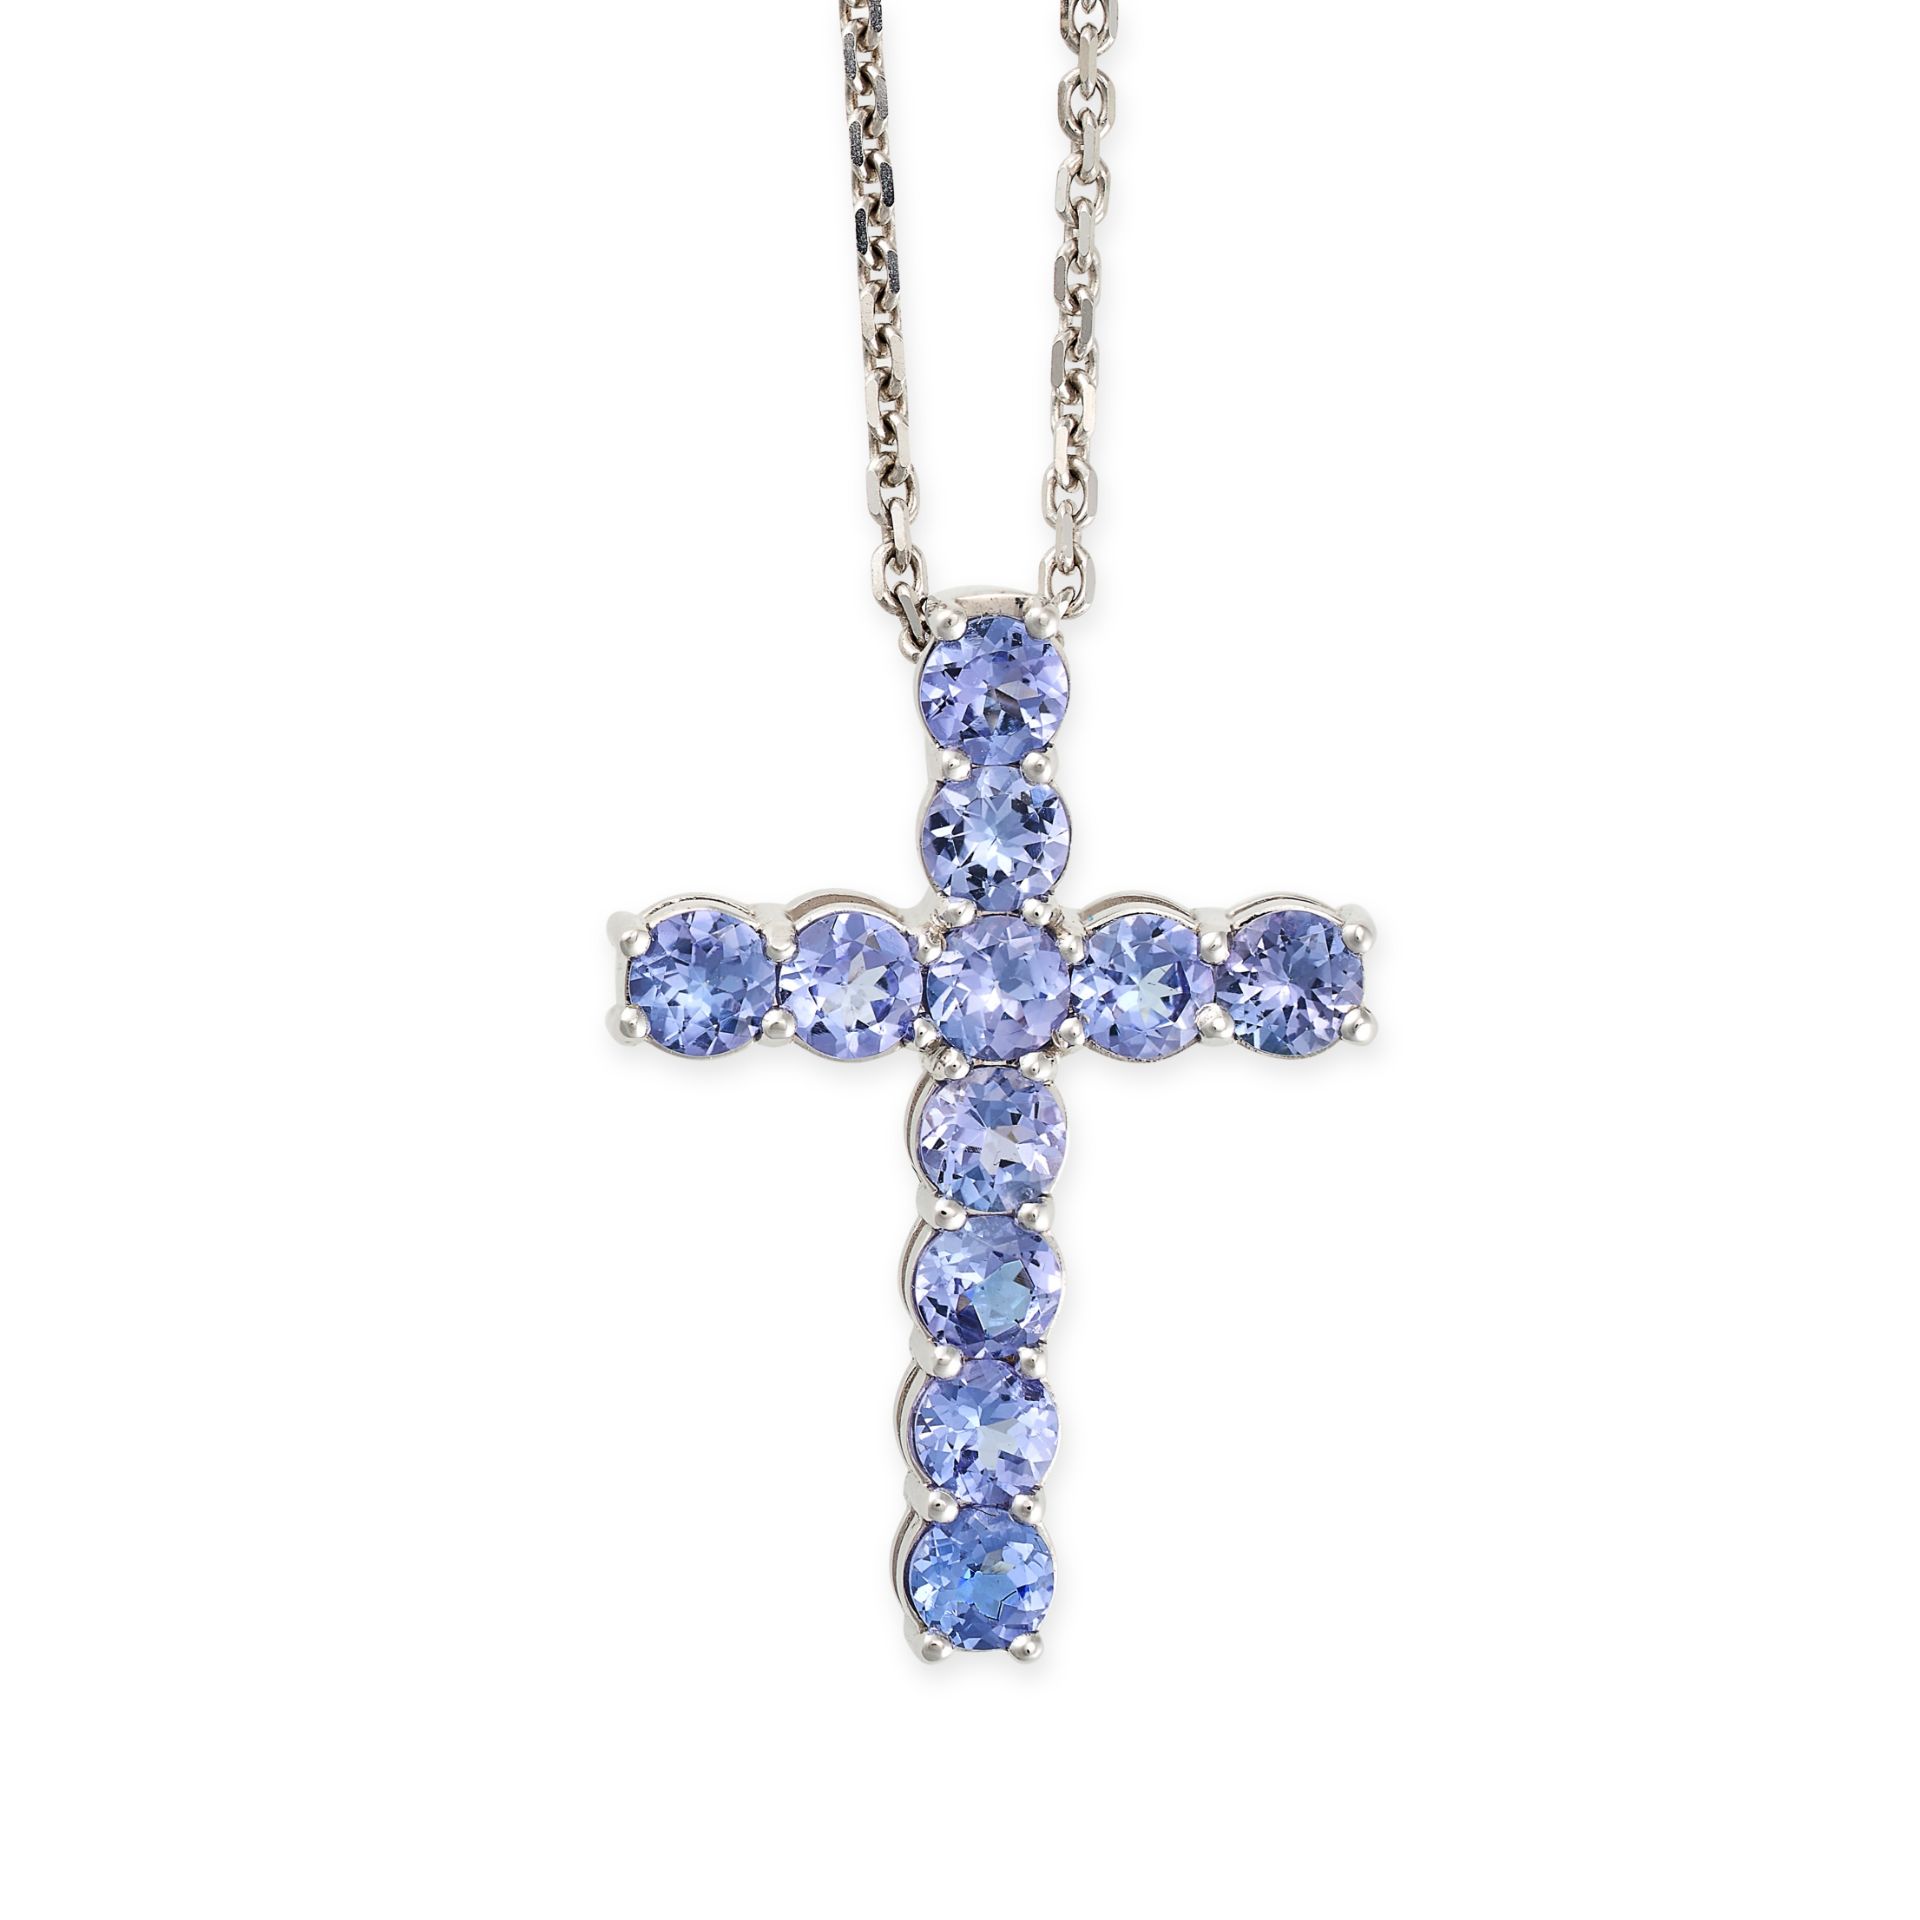 A TANZANITE CROSS PENDANT NECKLACE in 14ct white gold, designed as a cross set throughout with ro...